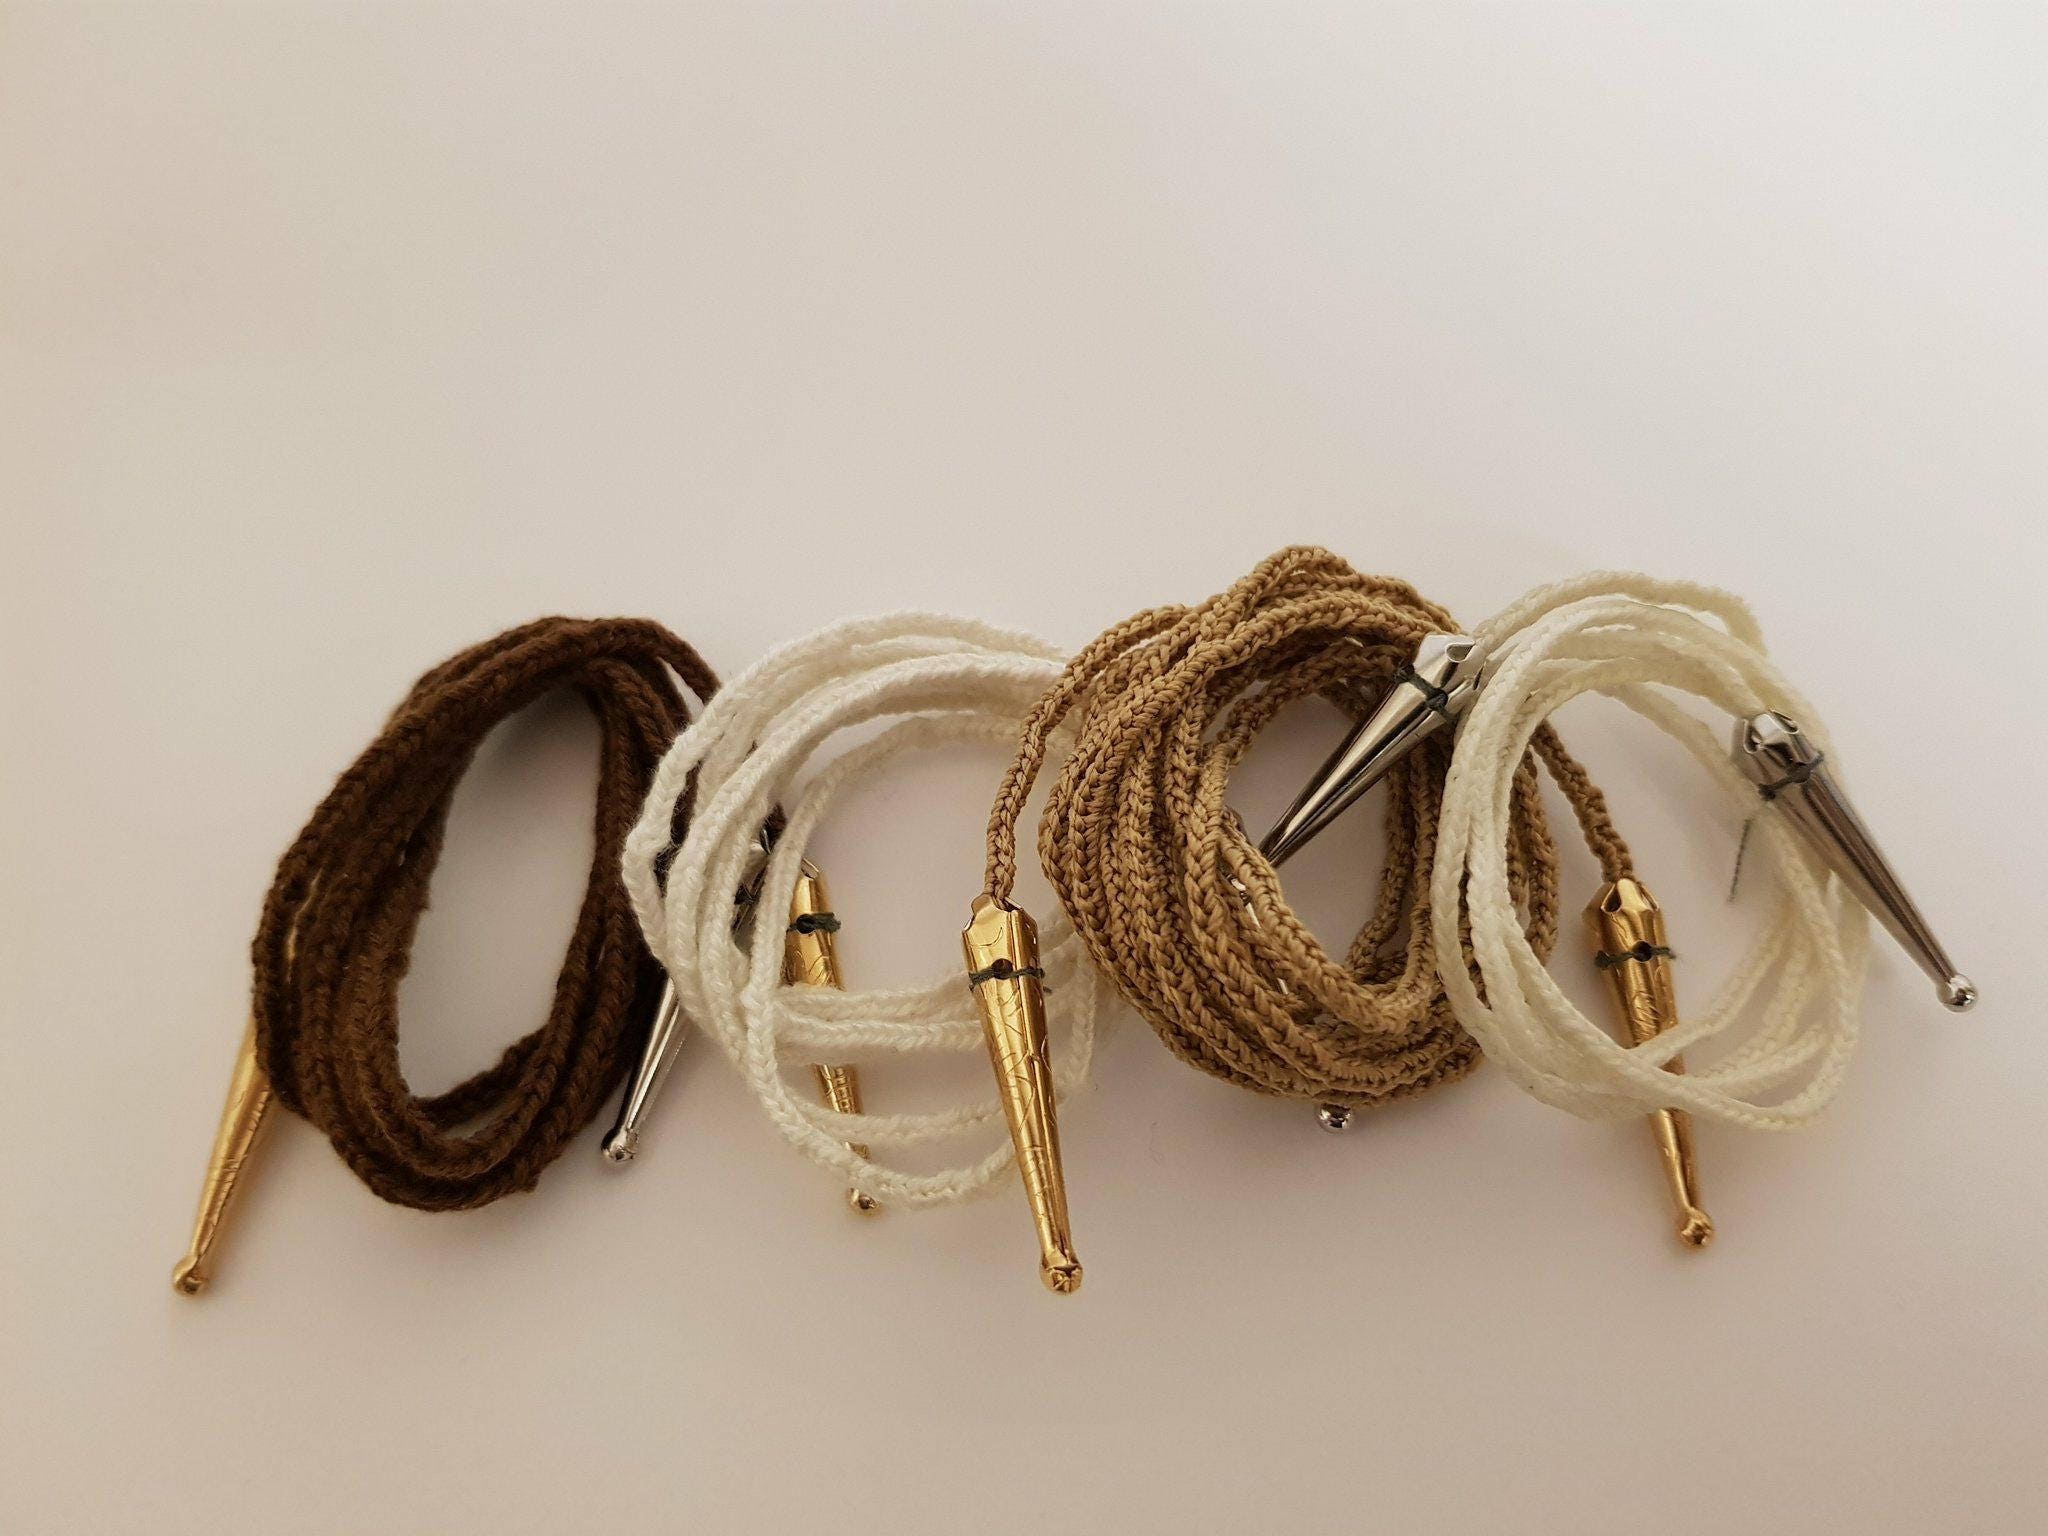 Aglet Shoelace End caps- Metal 4 colors - Enough for 4 sets of Shoelaces! -  Makes Great Gifts, Fun Way to Show off Your Weaving